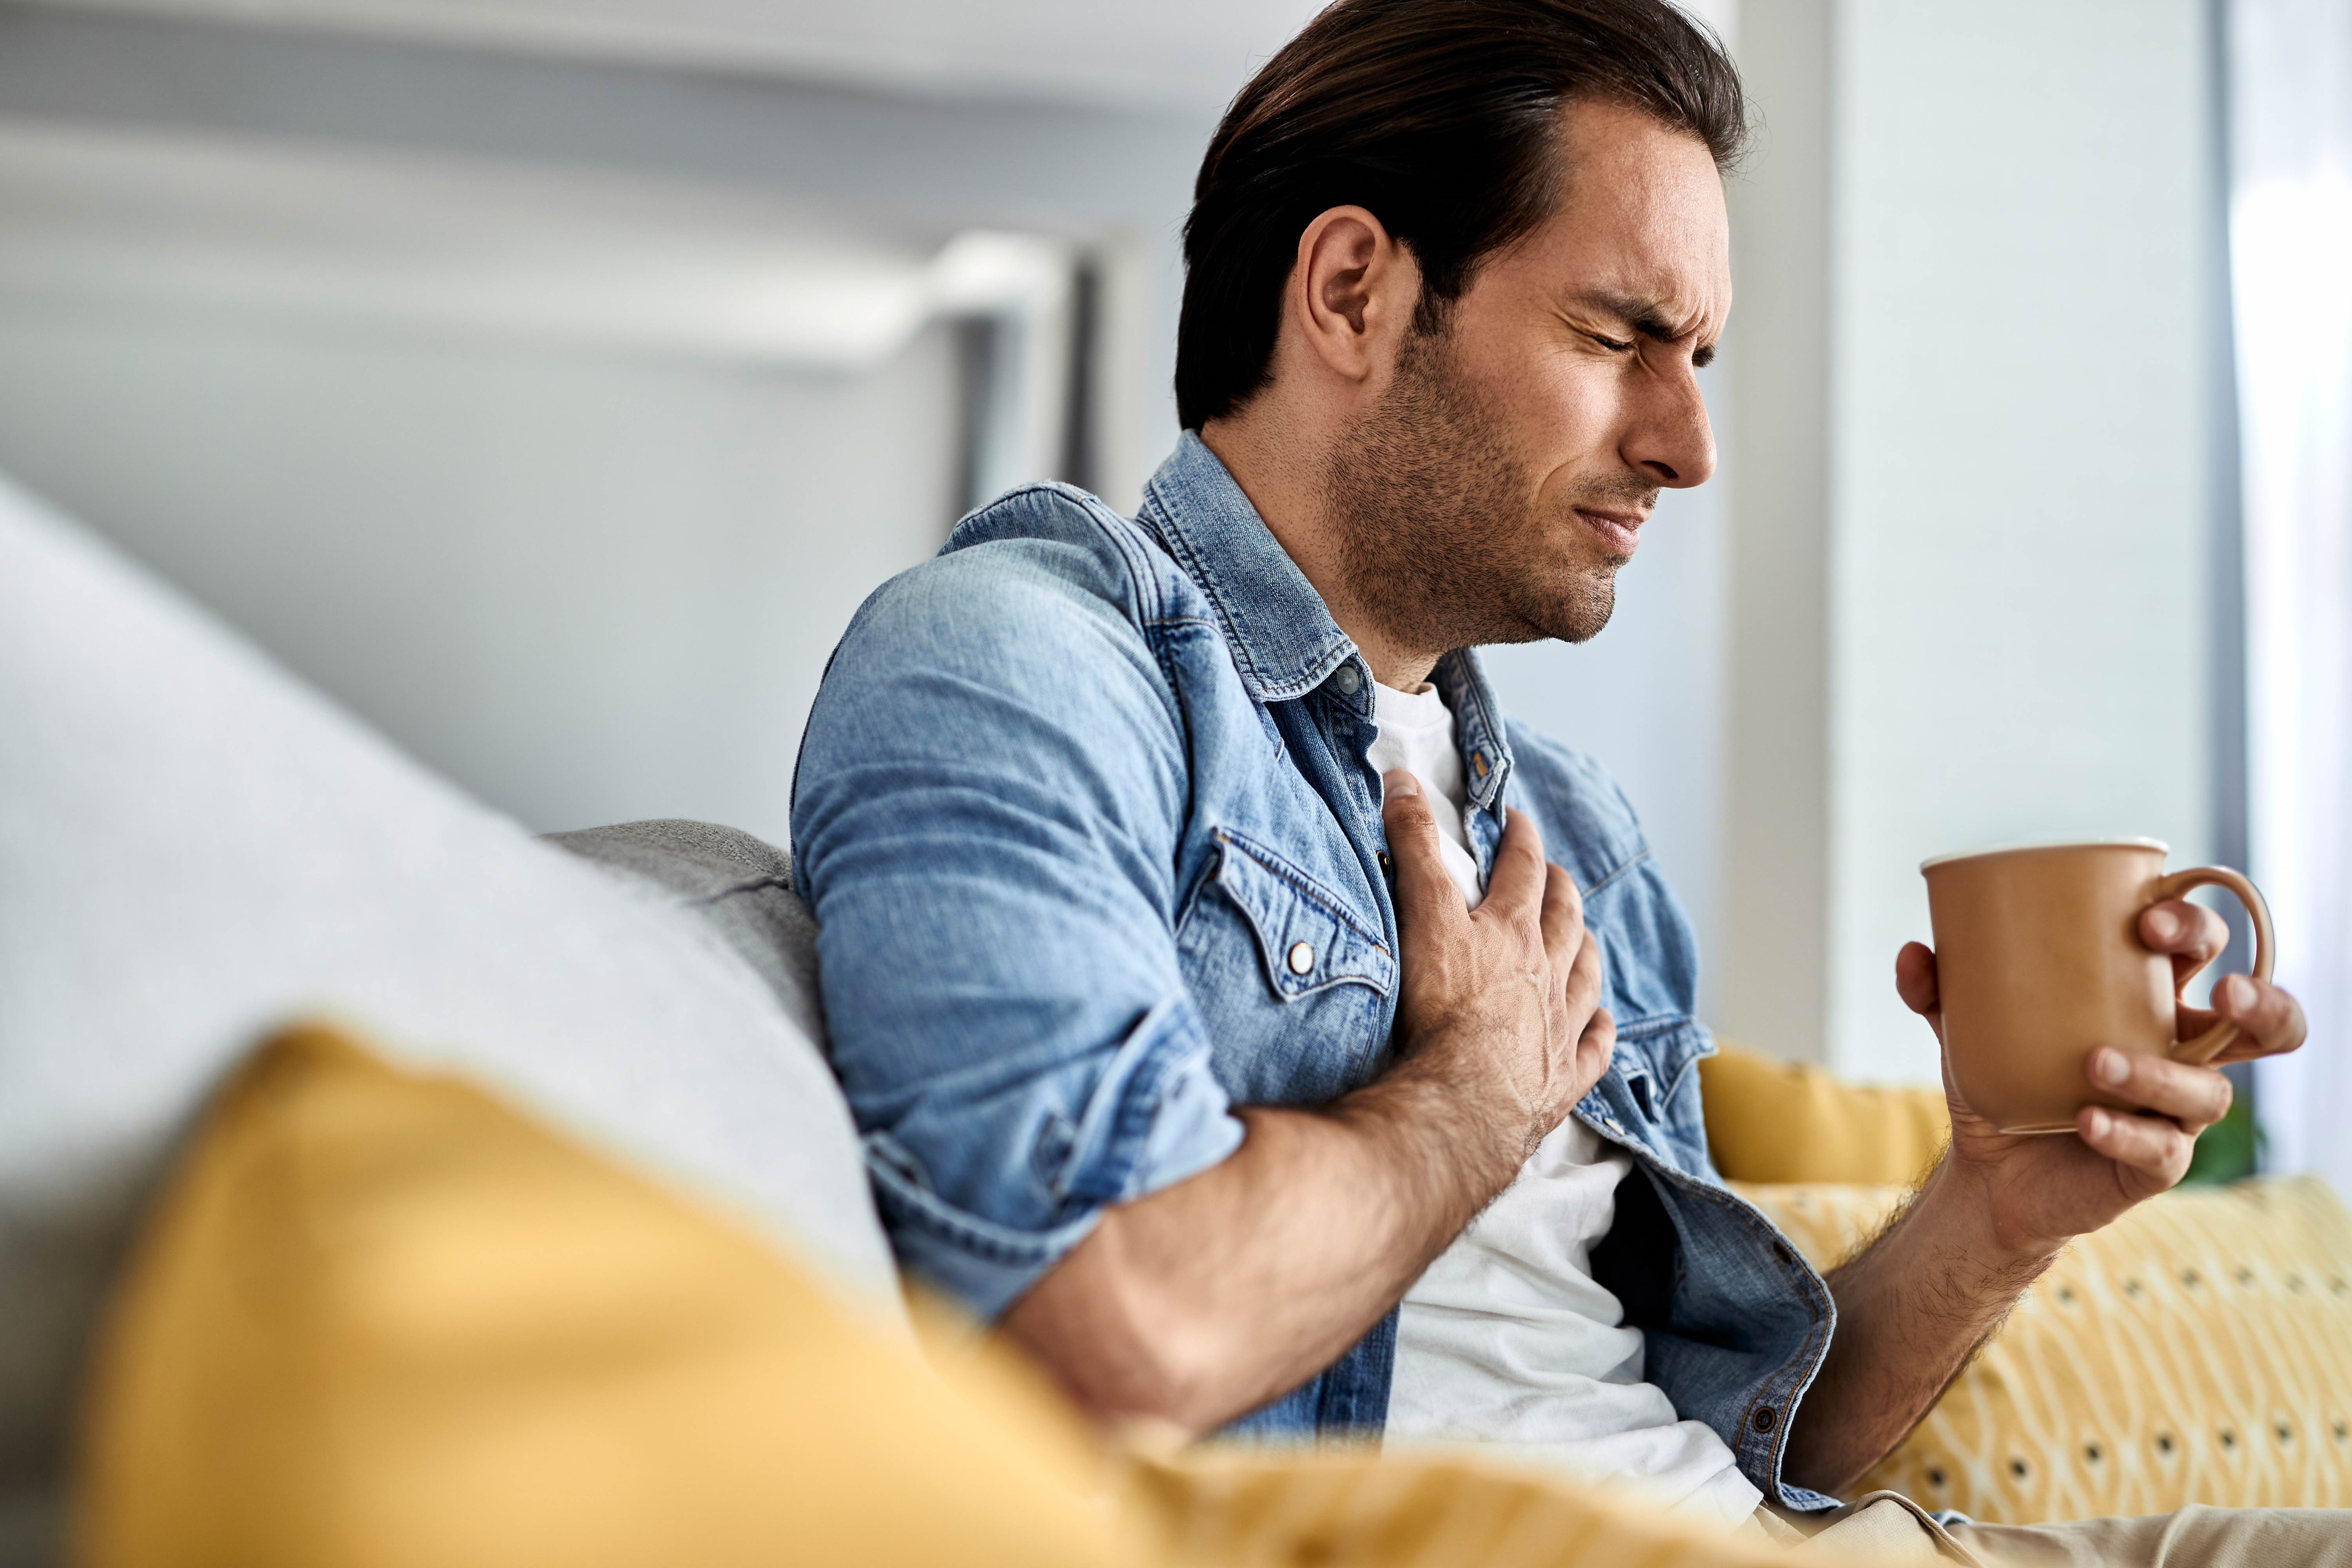 Listen to Your Heart: Recognizing Signs of a Heart Attack